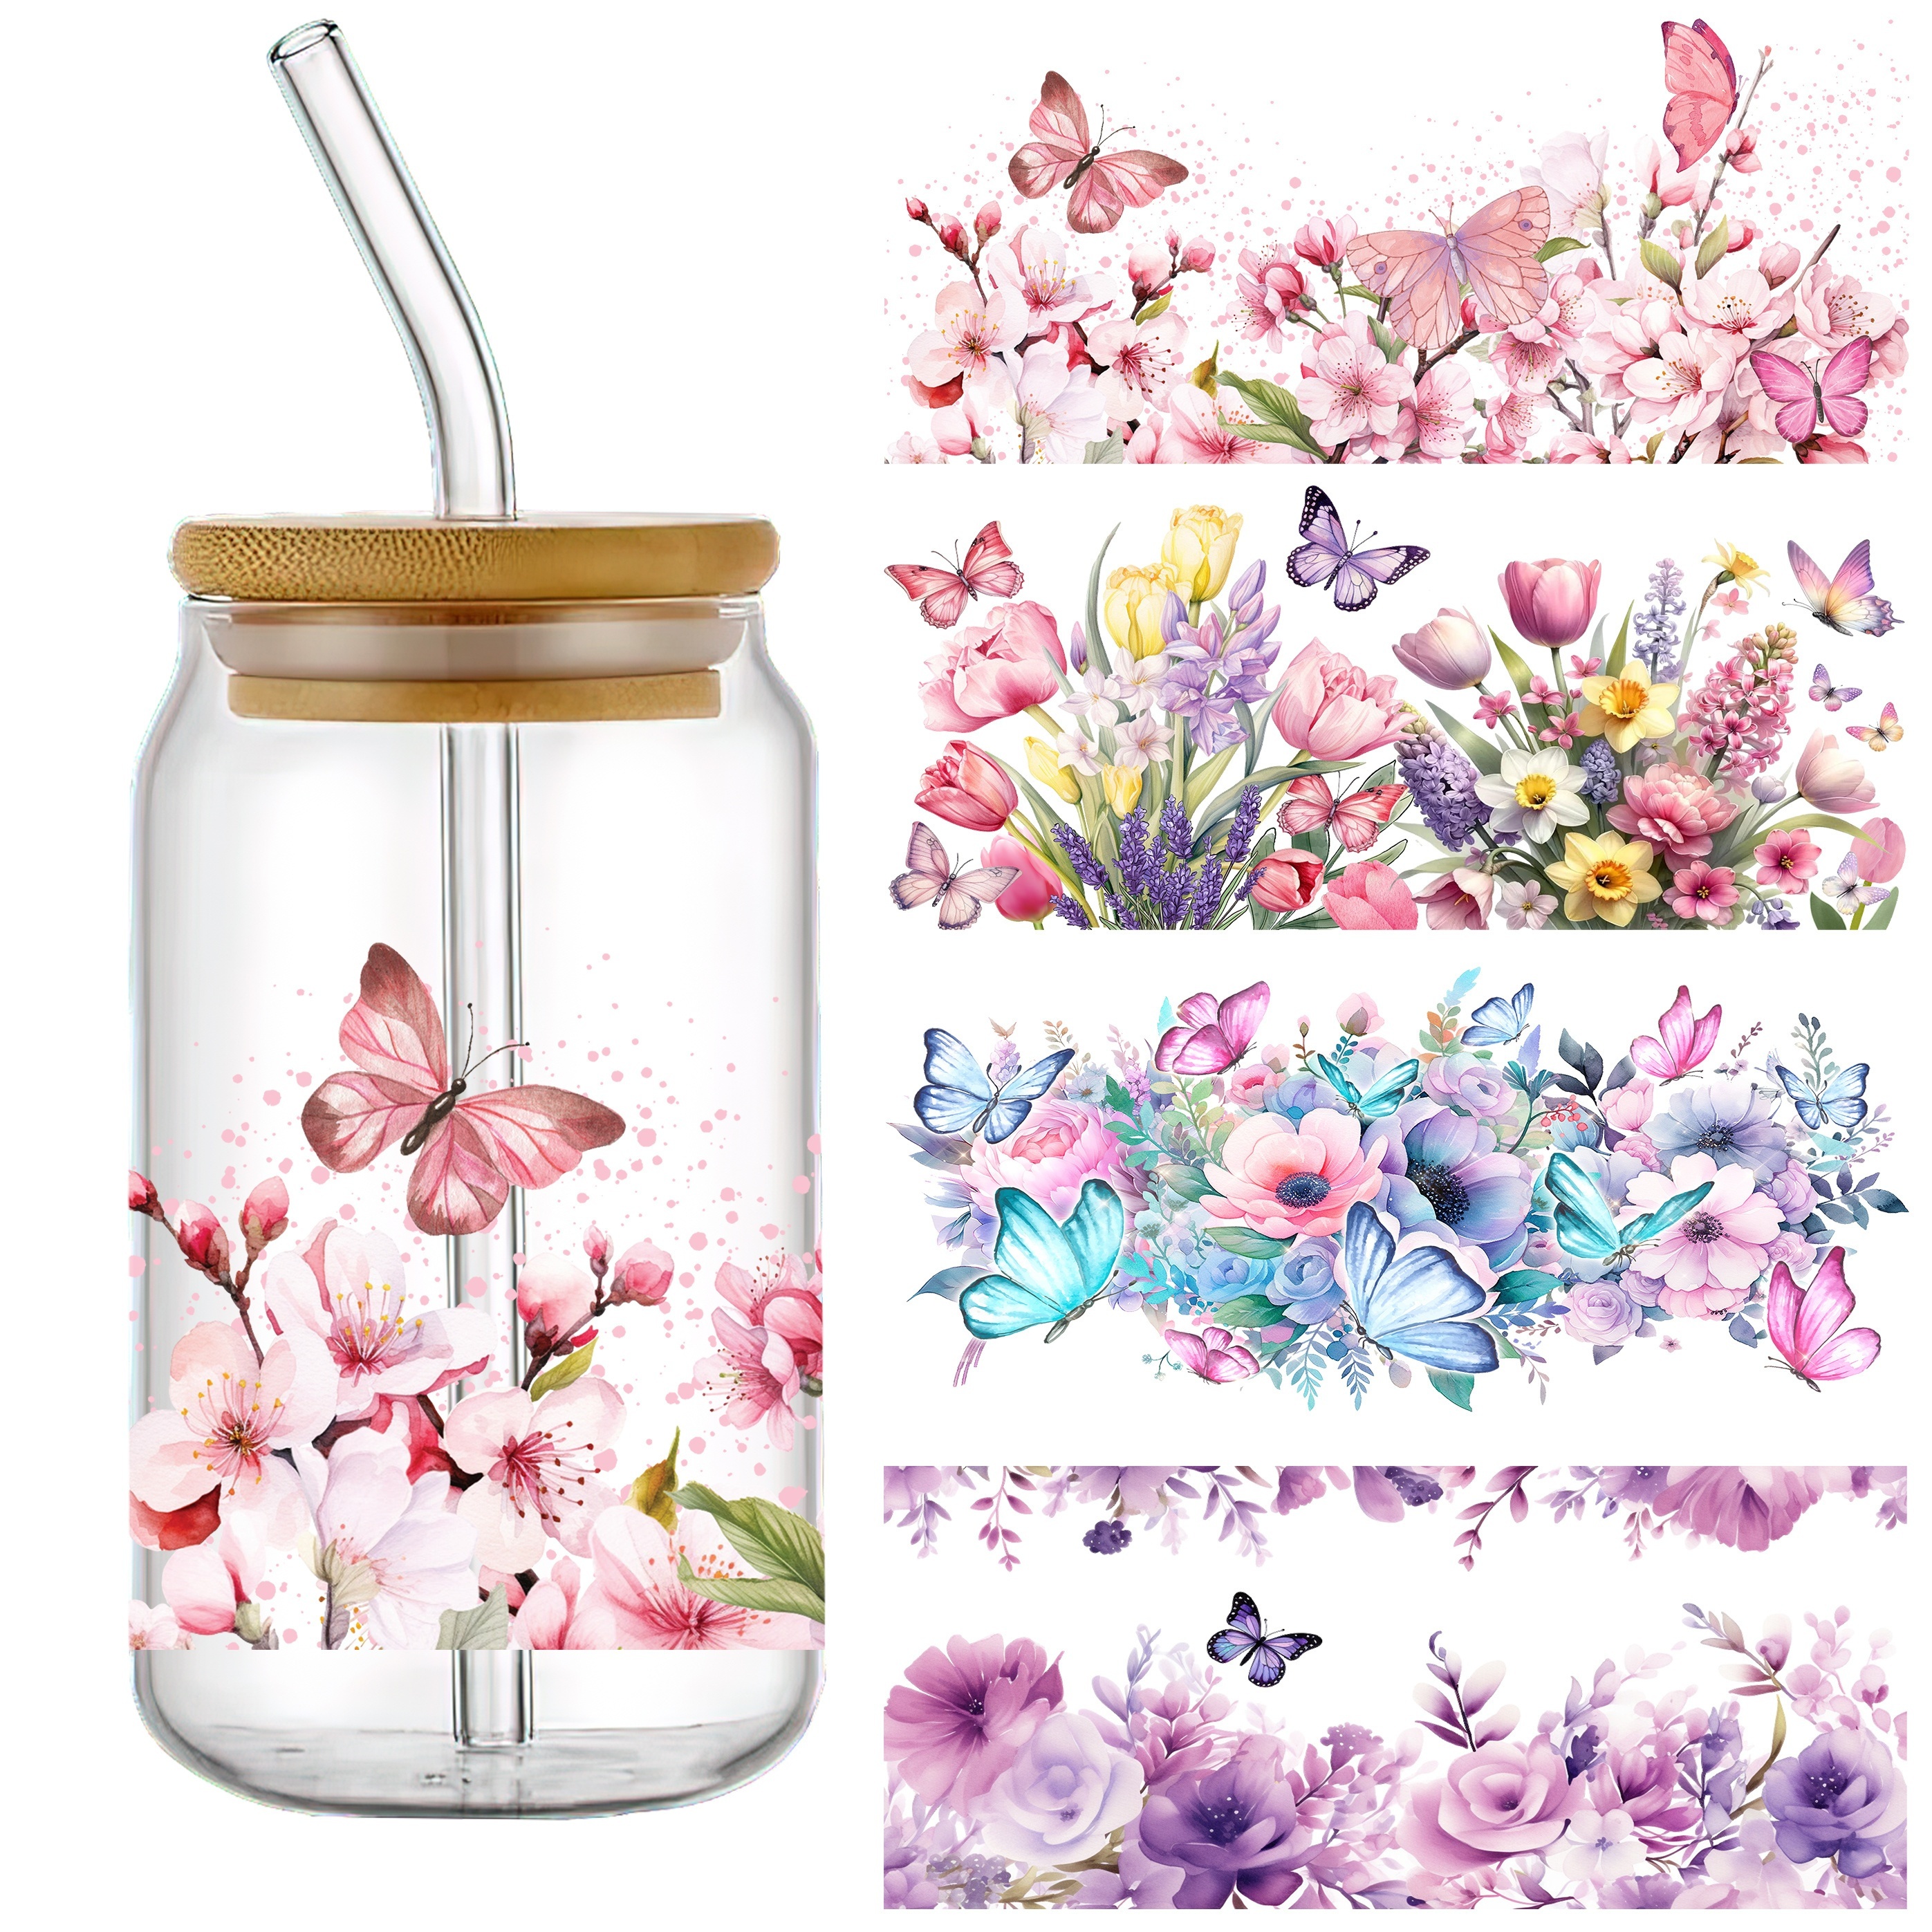 

adhesive" 4-piece Floral & Butterfly Uv Dtf Transfer Sticker Set - Waterproof, Scratch-resistant Decals For 16oz Glass Jars, Mugs & Bottles - High-quality Diy Crafts, Home Decor - 4.3"x9.4